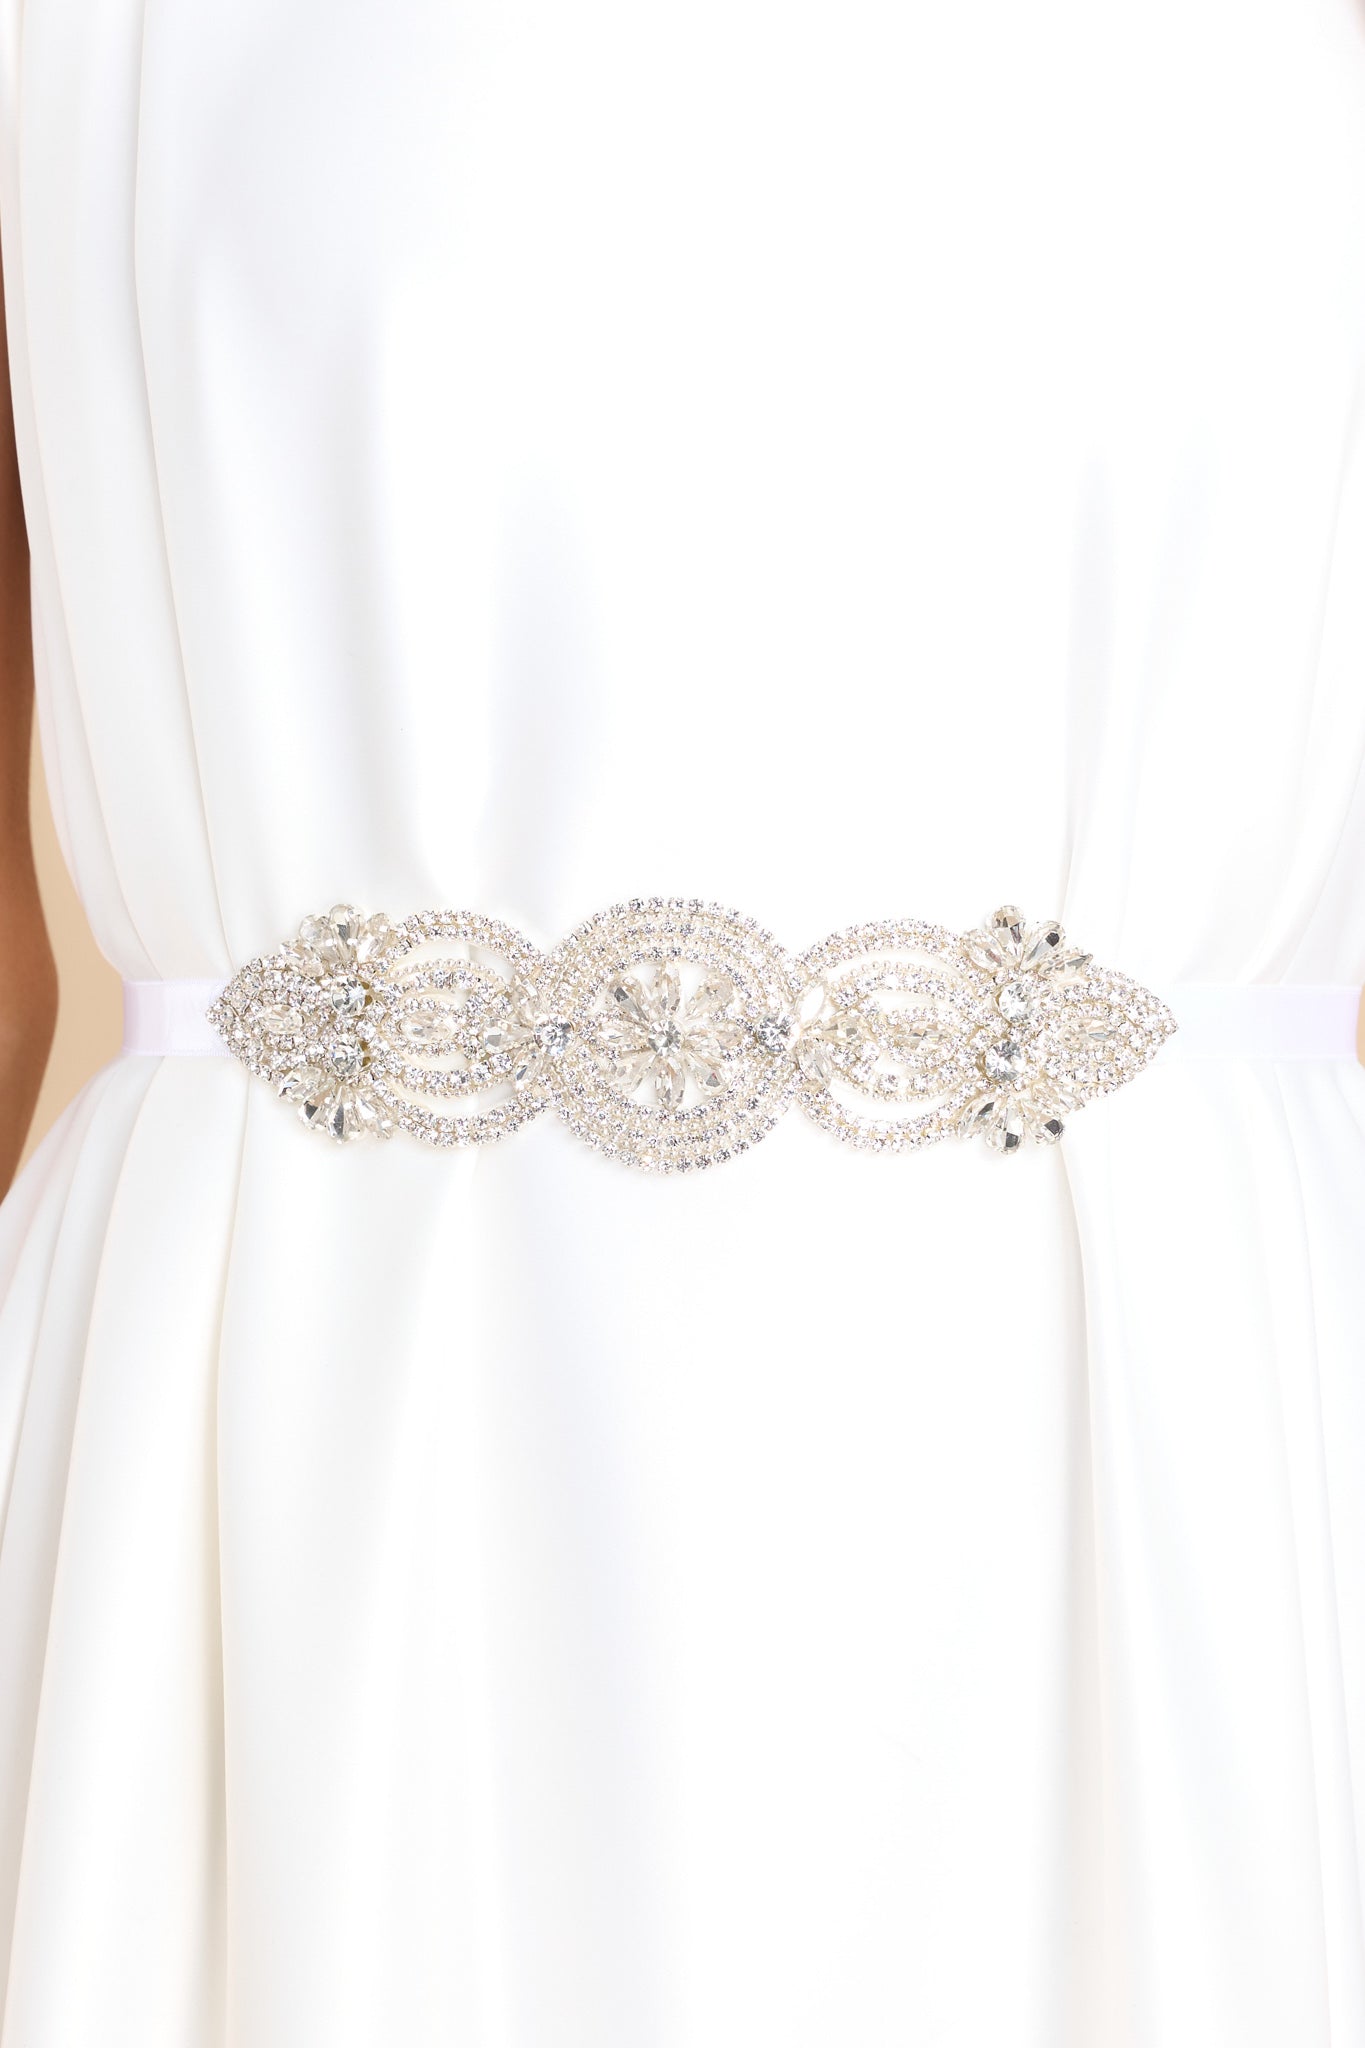 Front view of this belt that features a crystal centerpiece with floral details, and a self-tie ribbon closure.